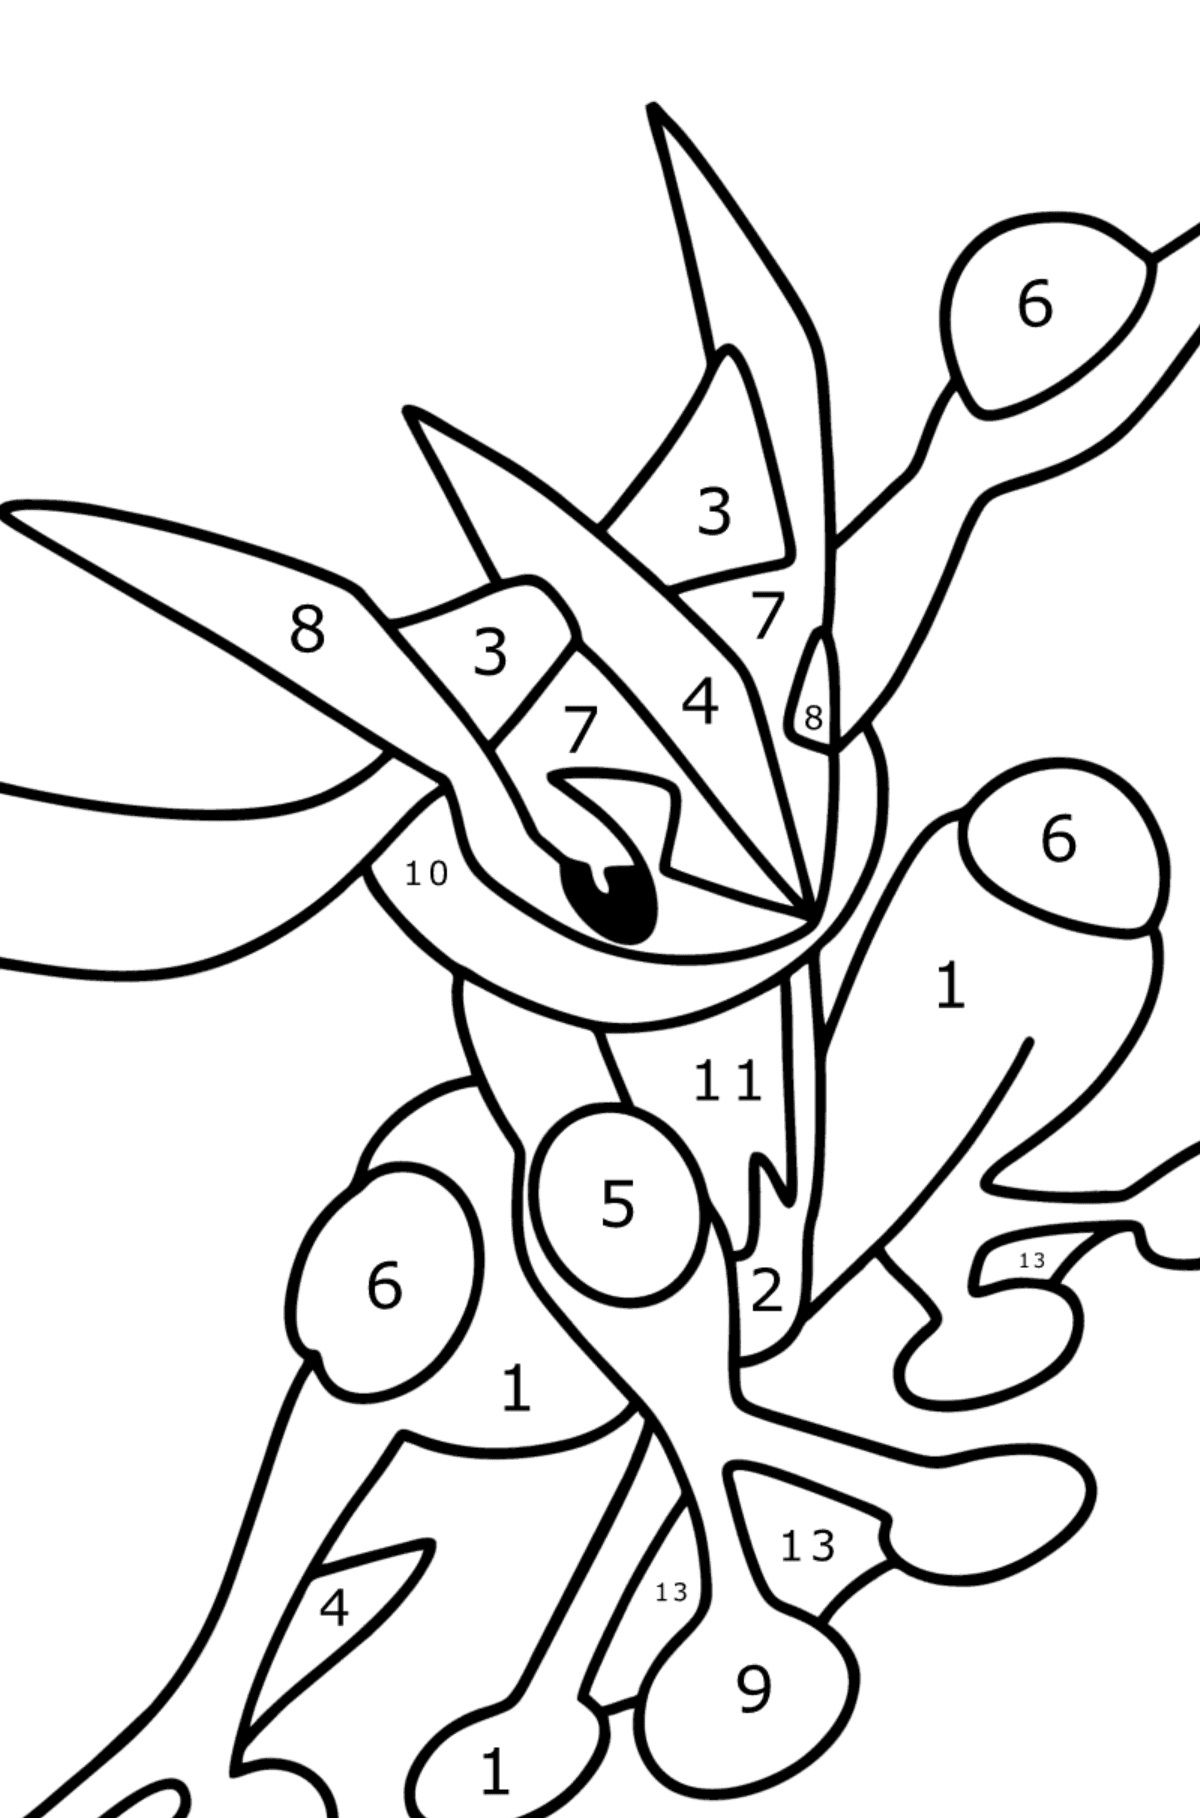 Coloring page Pokemon Go Greninja - Coloring by Numbers for Kids